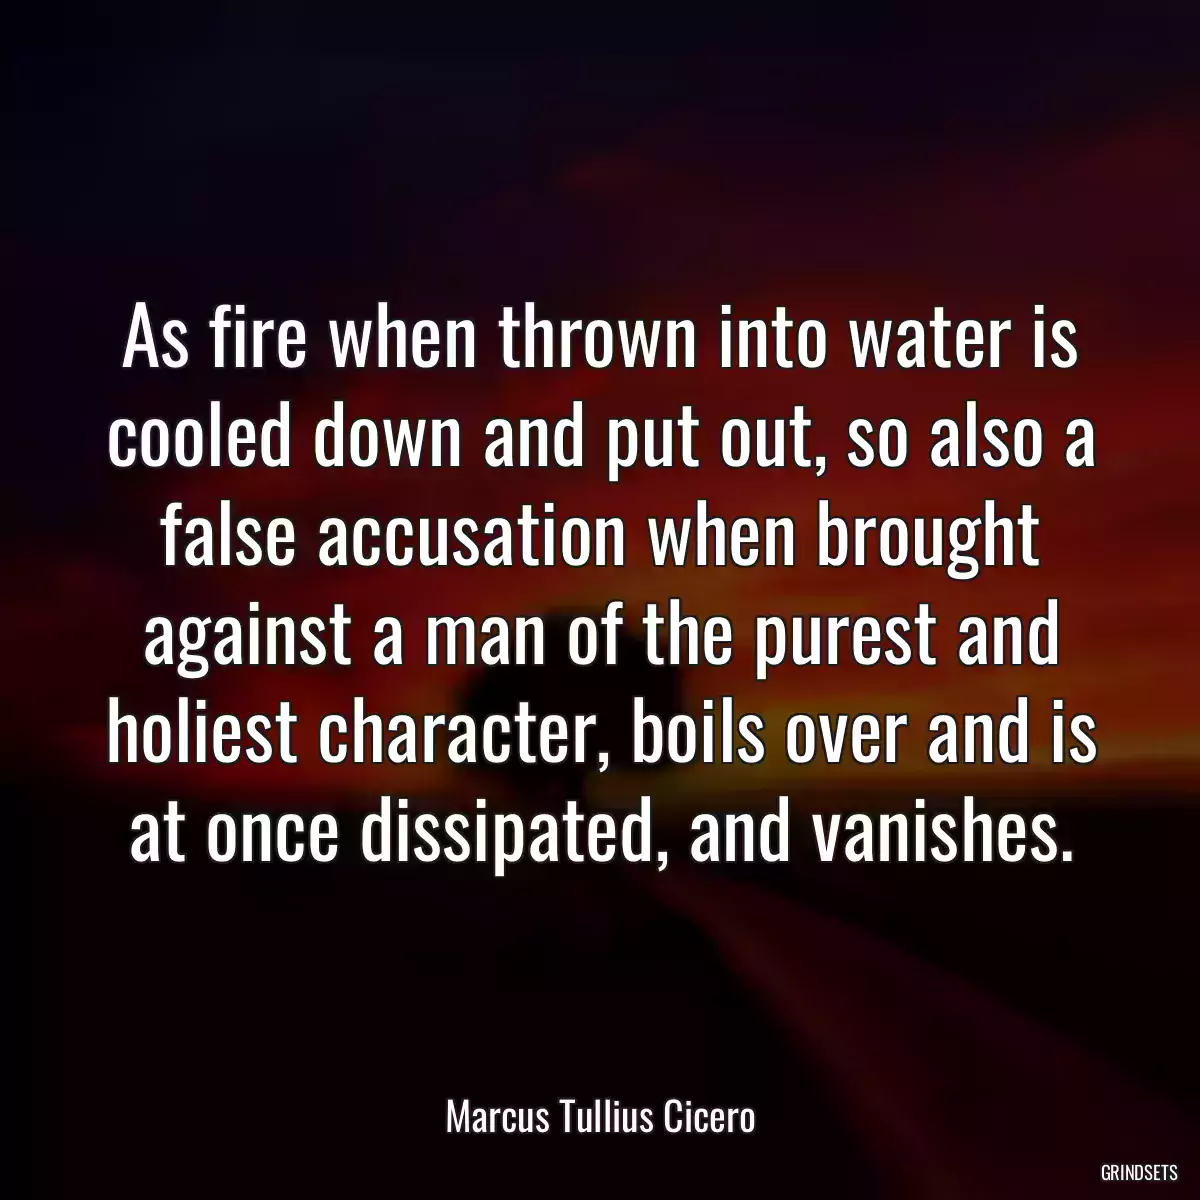 As fire when thrown into water is cooled down and put out, so also a false accusation when brought against a man of the purest and holiest character, boils over and is at once dissipated, and vanishes.